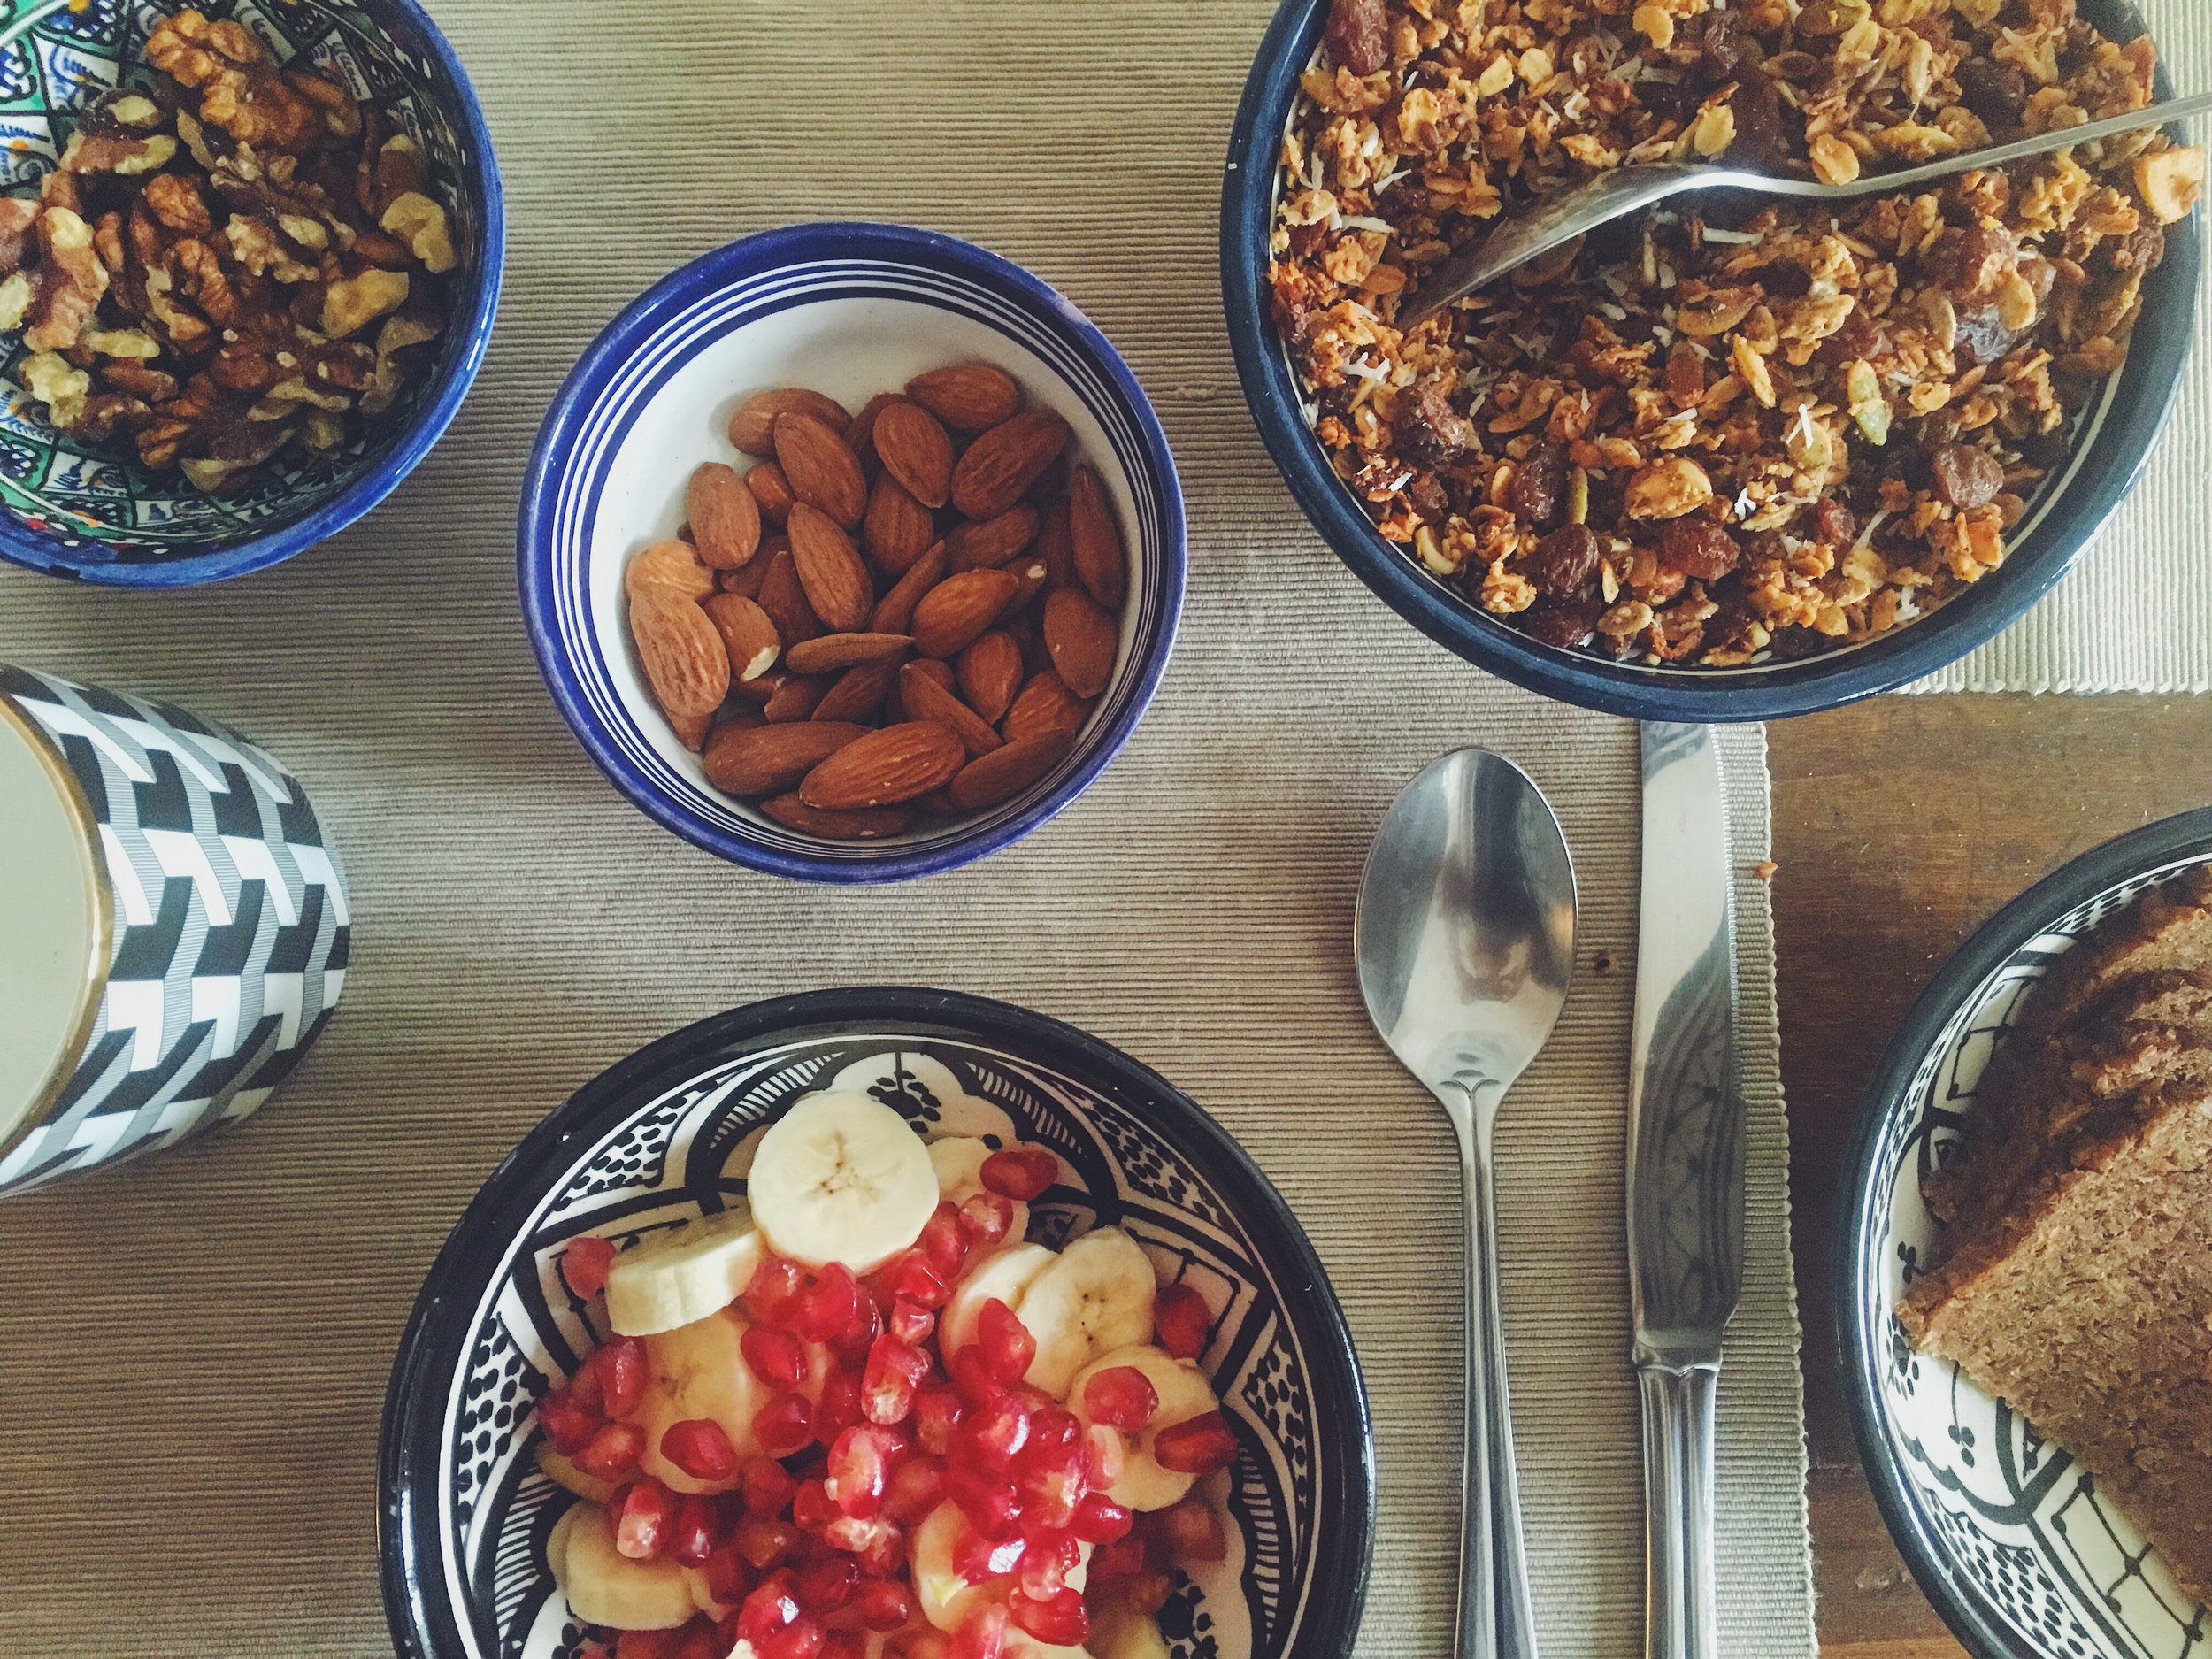 Homemade granola and ingredients for DIY bowl :)